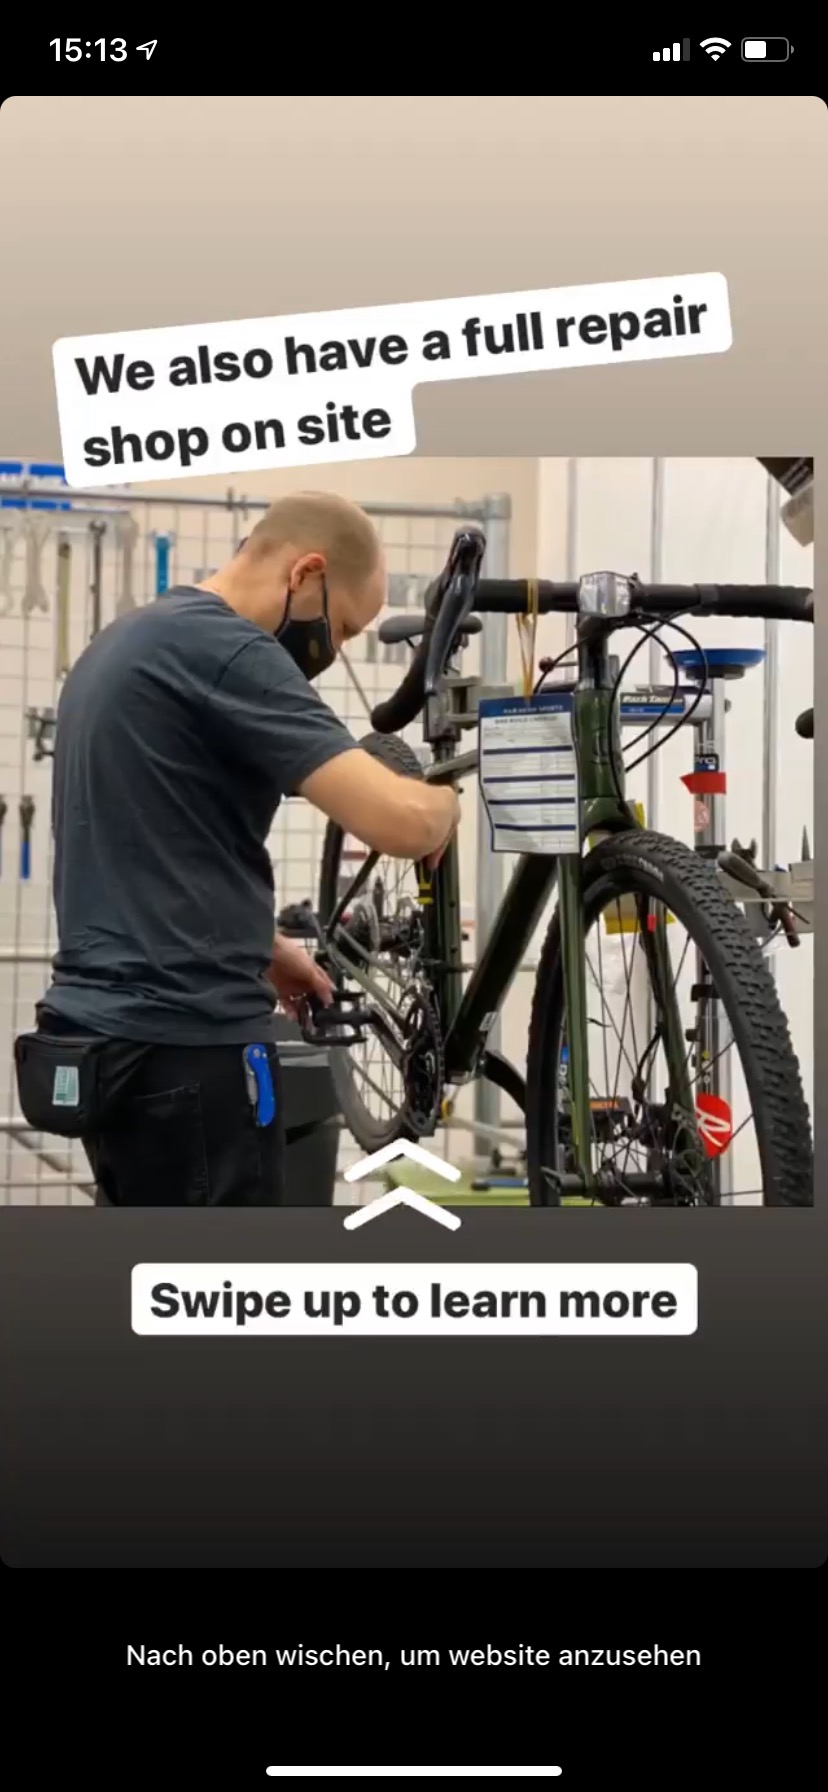 Best Practices: The sports store Paragon Sports uses these content ideas in  their Instagram marketing